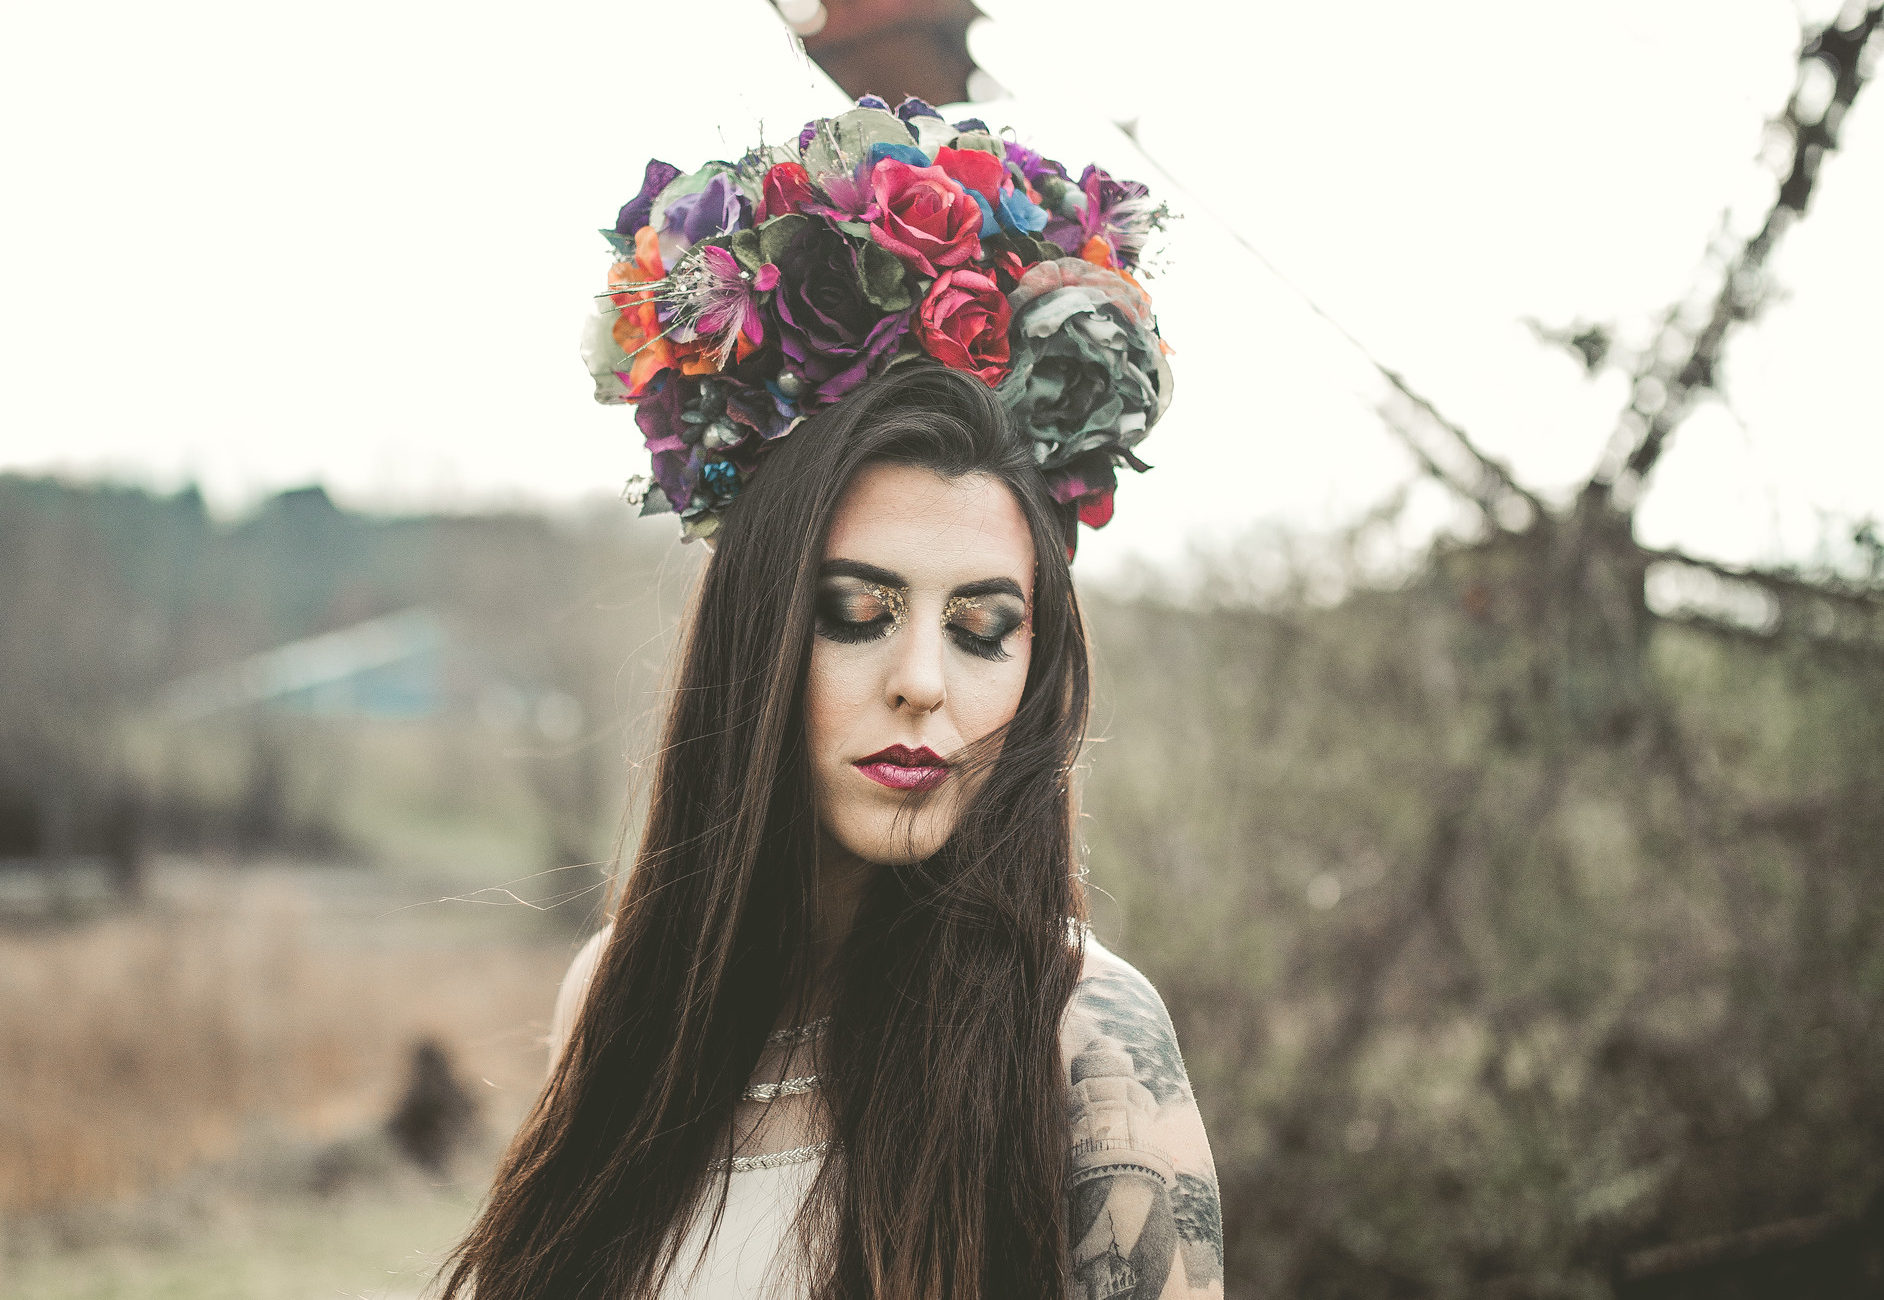 This photo is from a collaborative shoot with Meg U Photography with Kat Gibson as our model. The flower crown was crafted by Sandra Eileen, owner of Every Girl A Goddess.